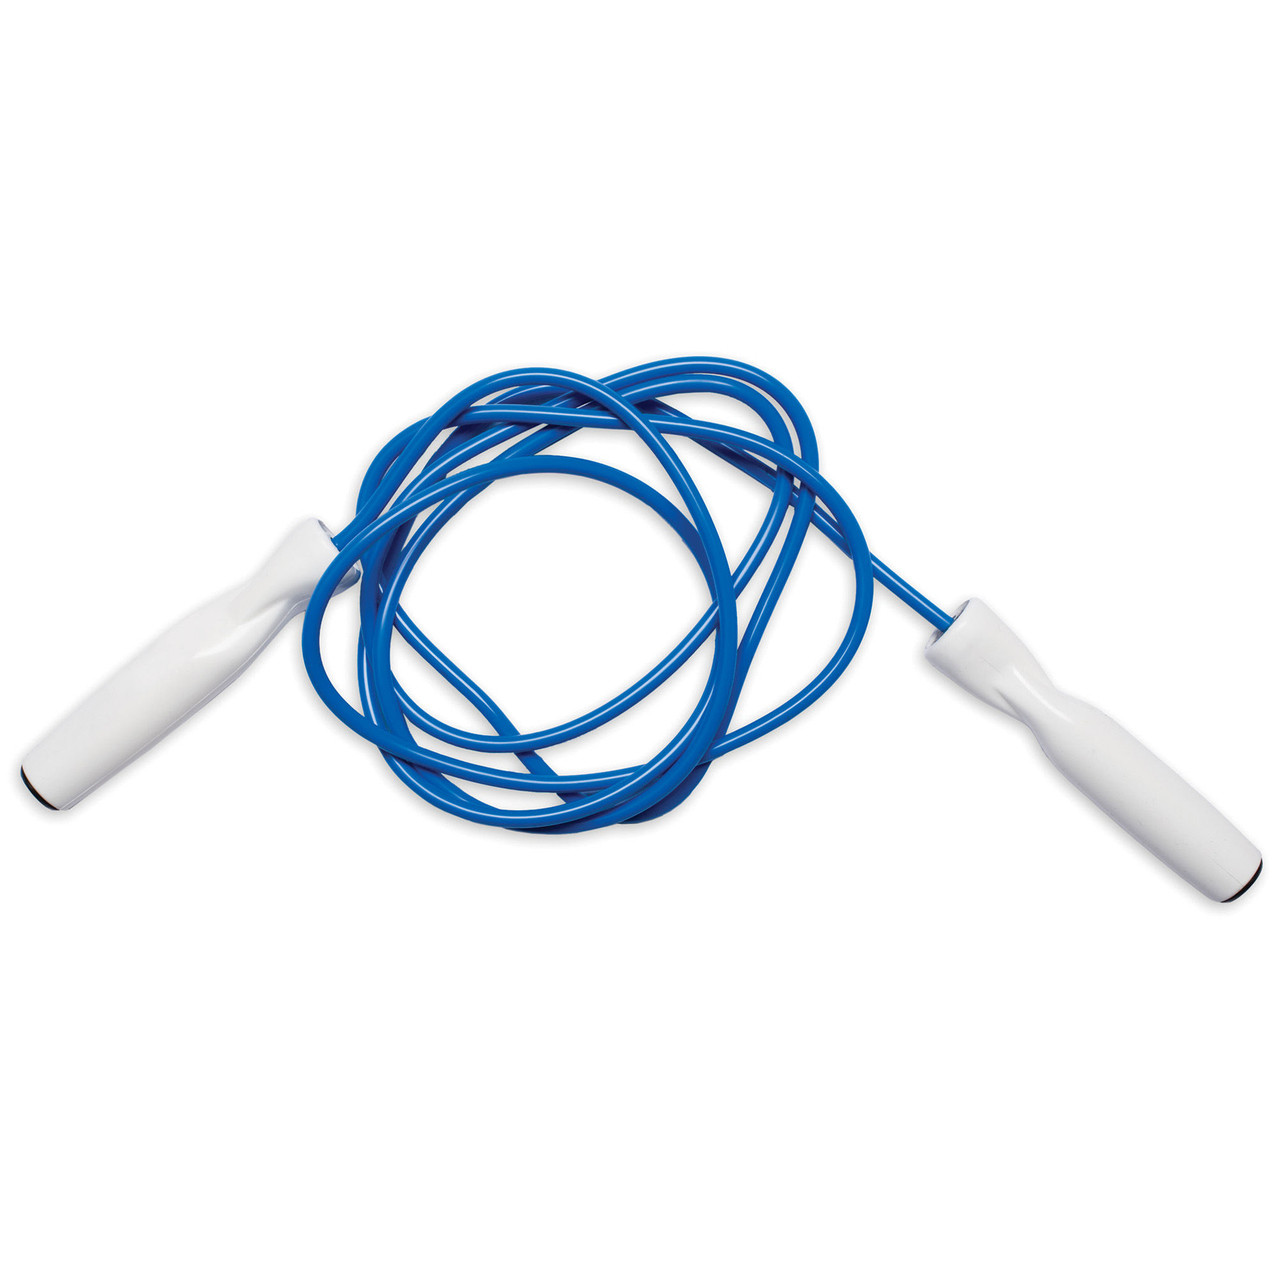  STARFIT Lightweight Jump Rope with Plastic Handles